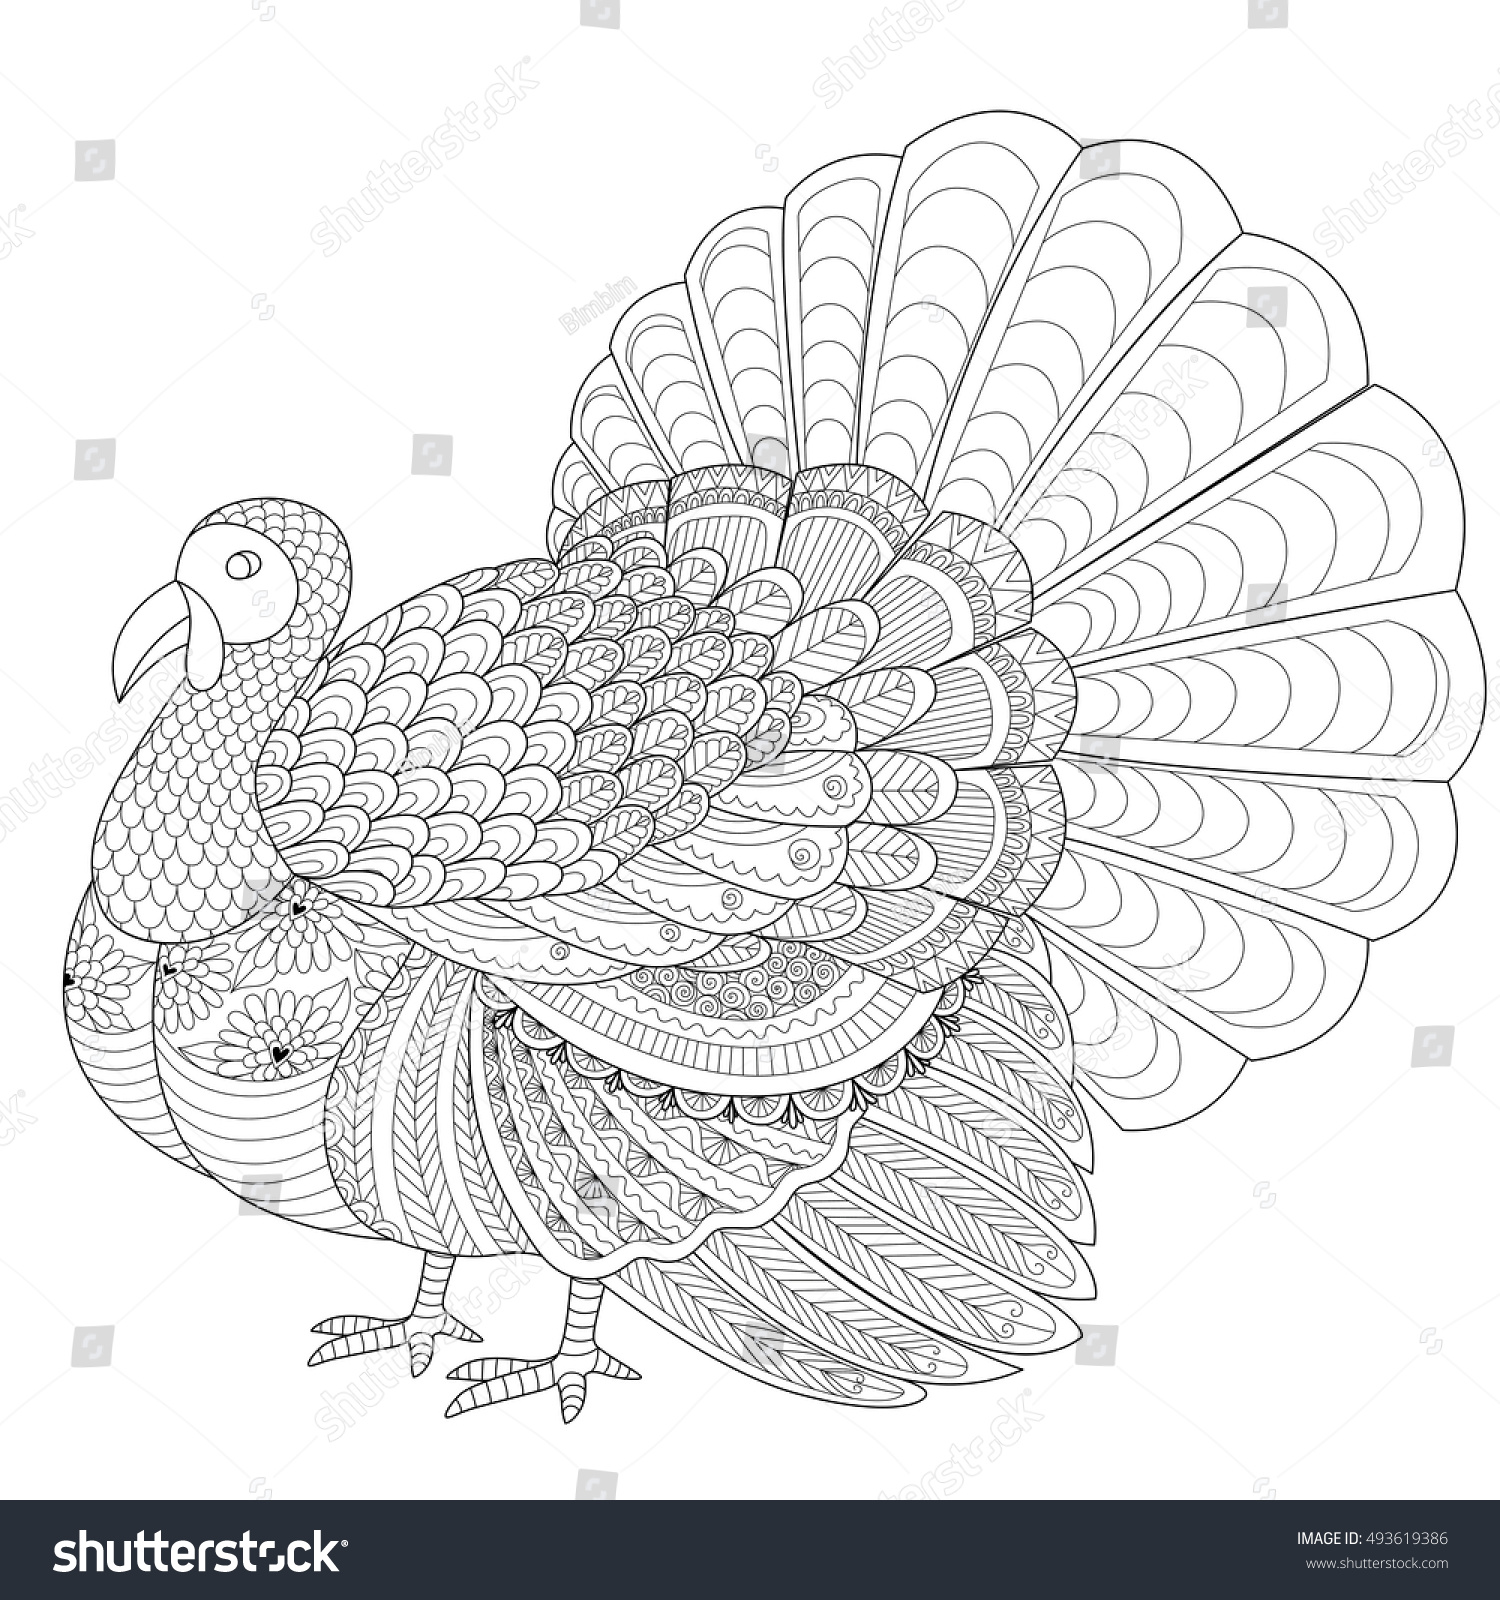 Detailed zentangle turkey for coloring page for adult and Thanksgiving invitation card